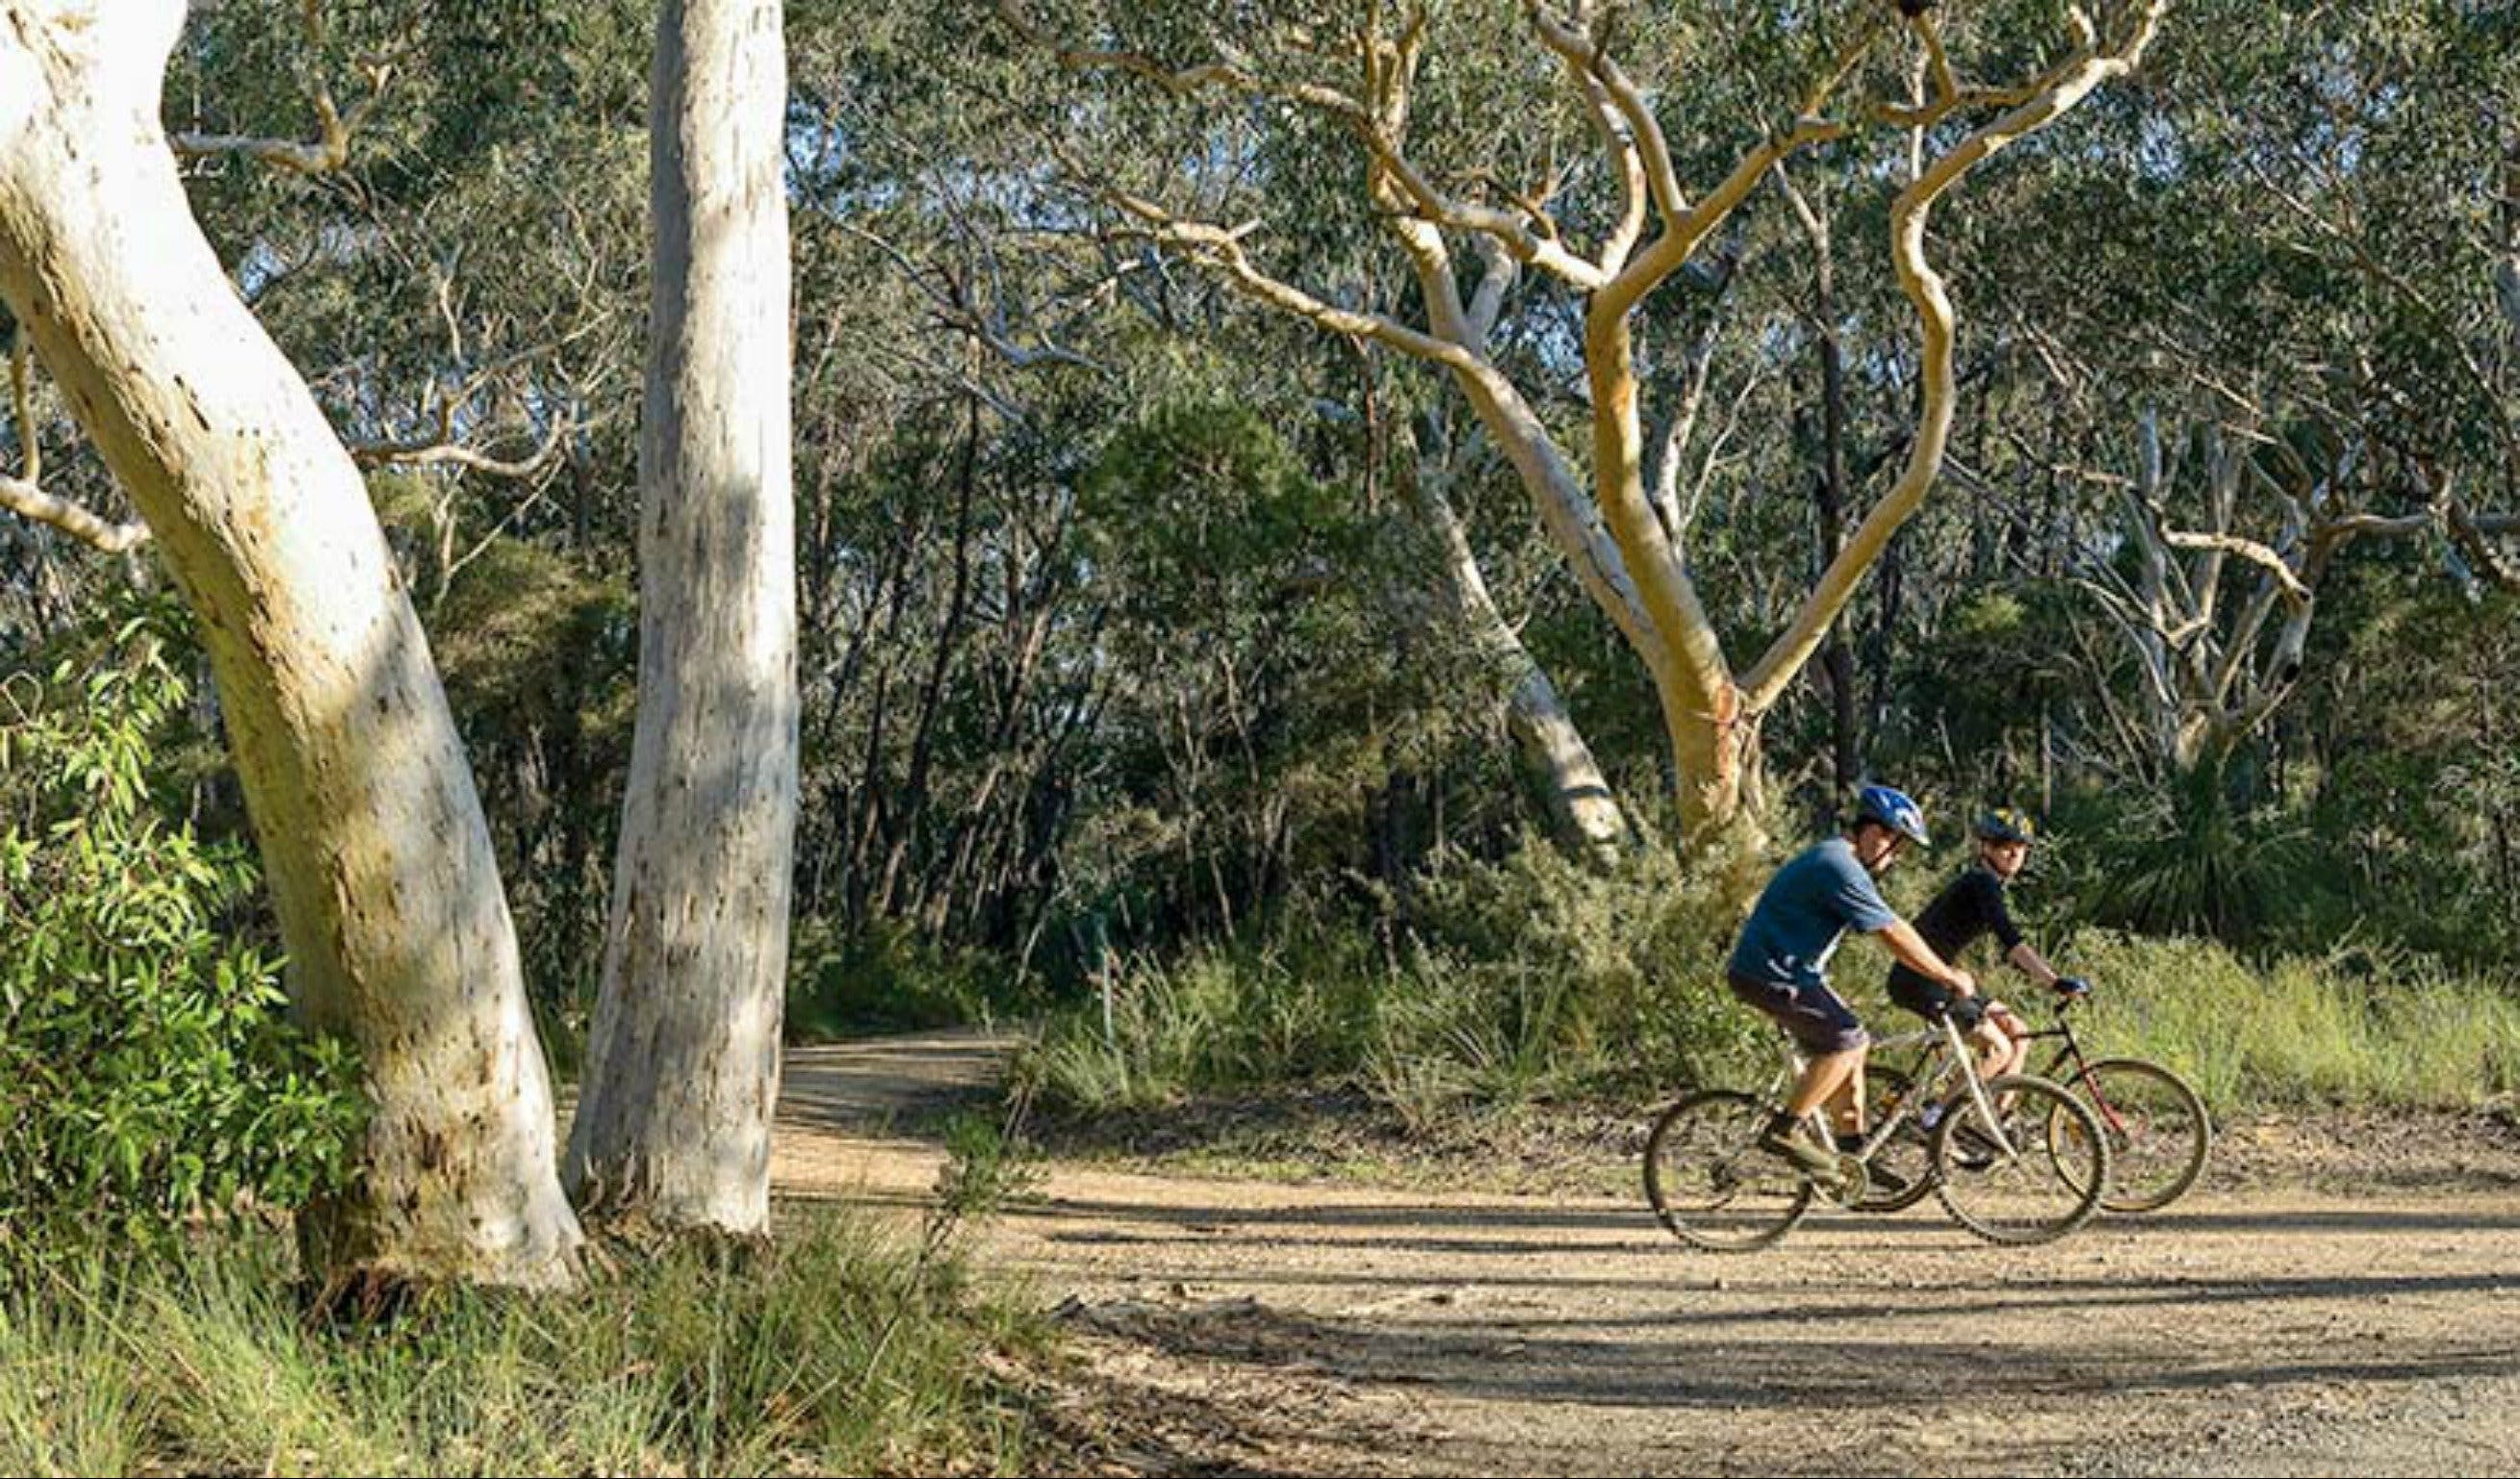 Bundanoon cycling route - Redcliffe Tourism